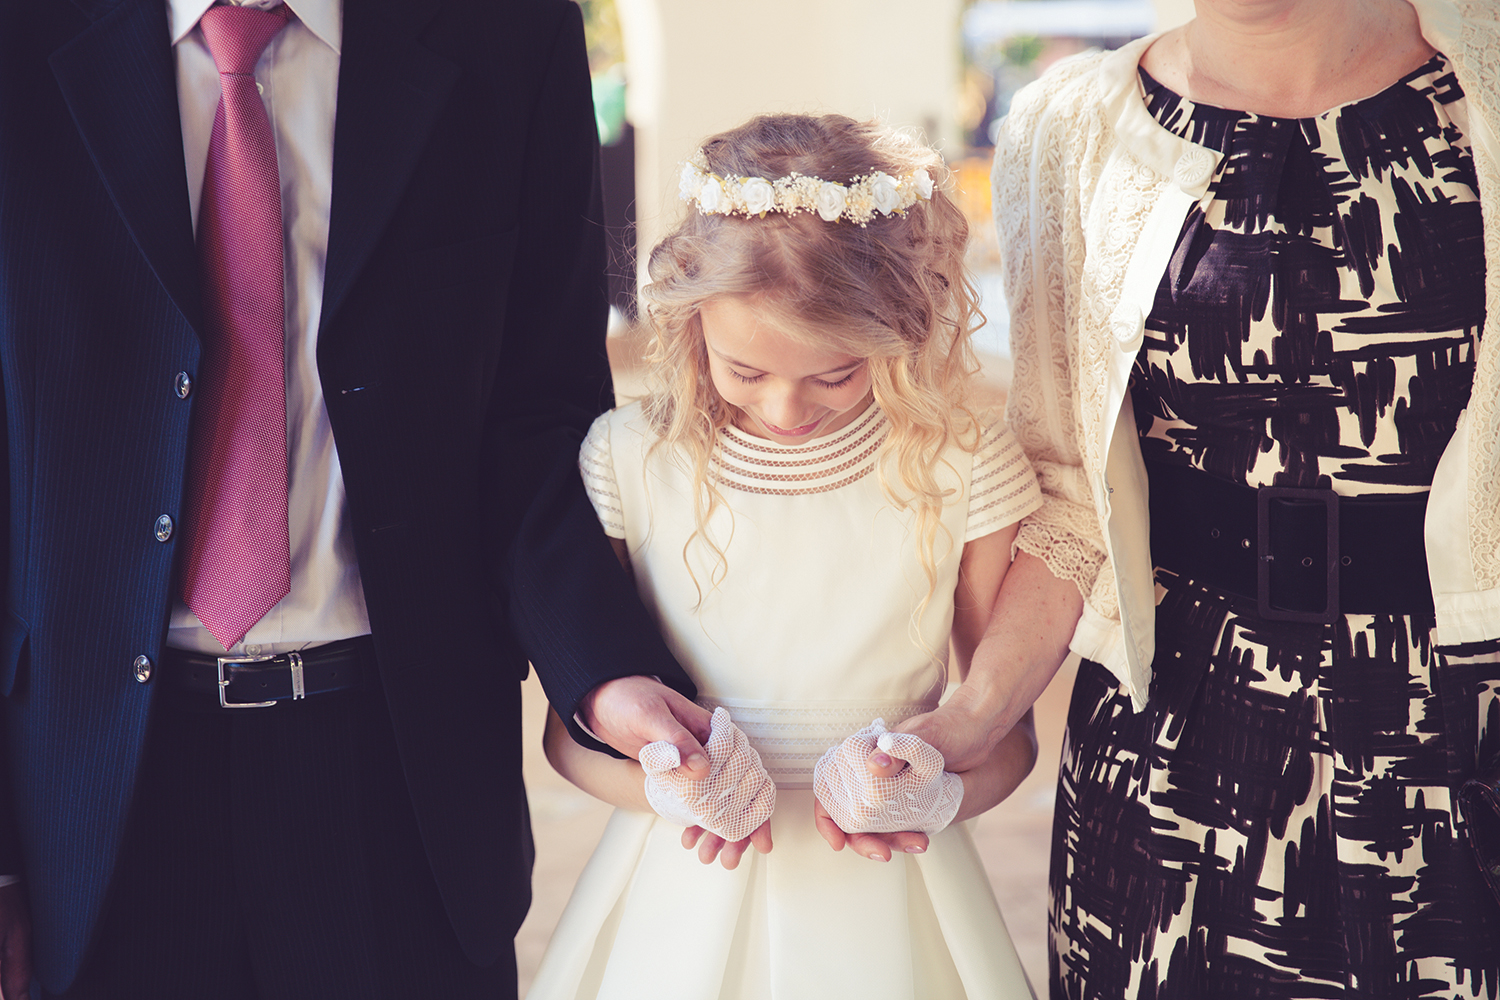 Five tips for celebrating First Communion without stress